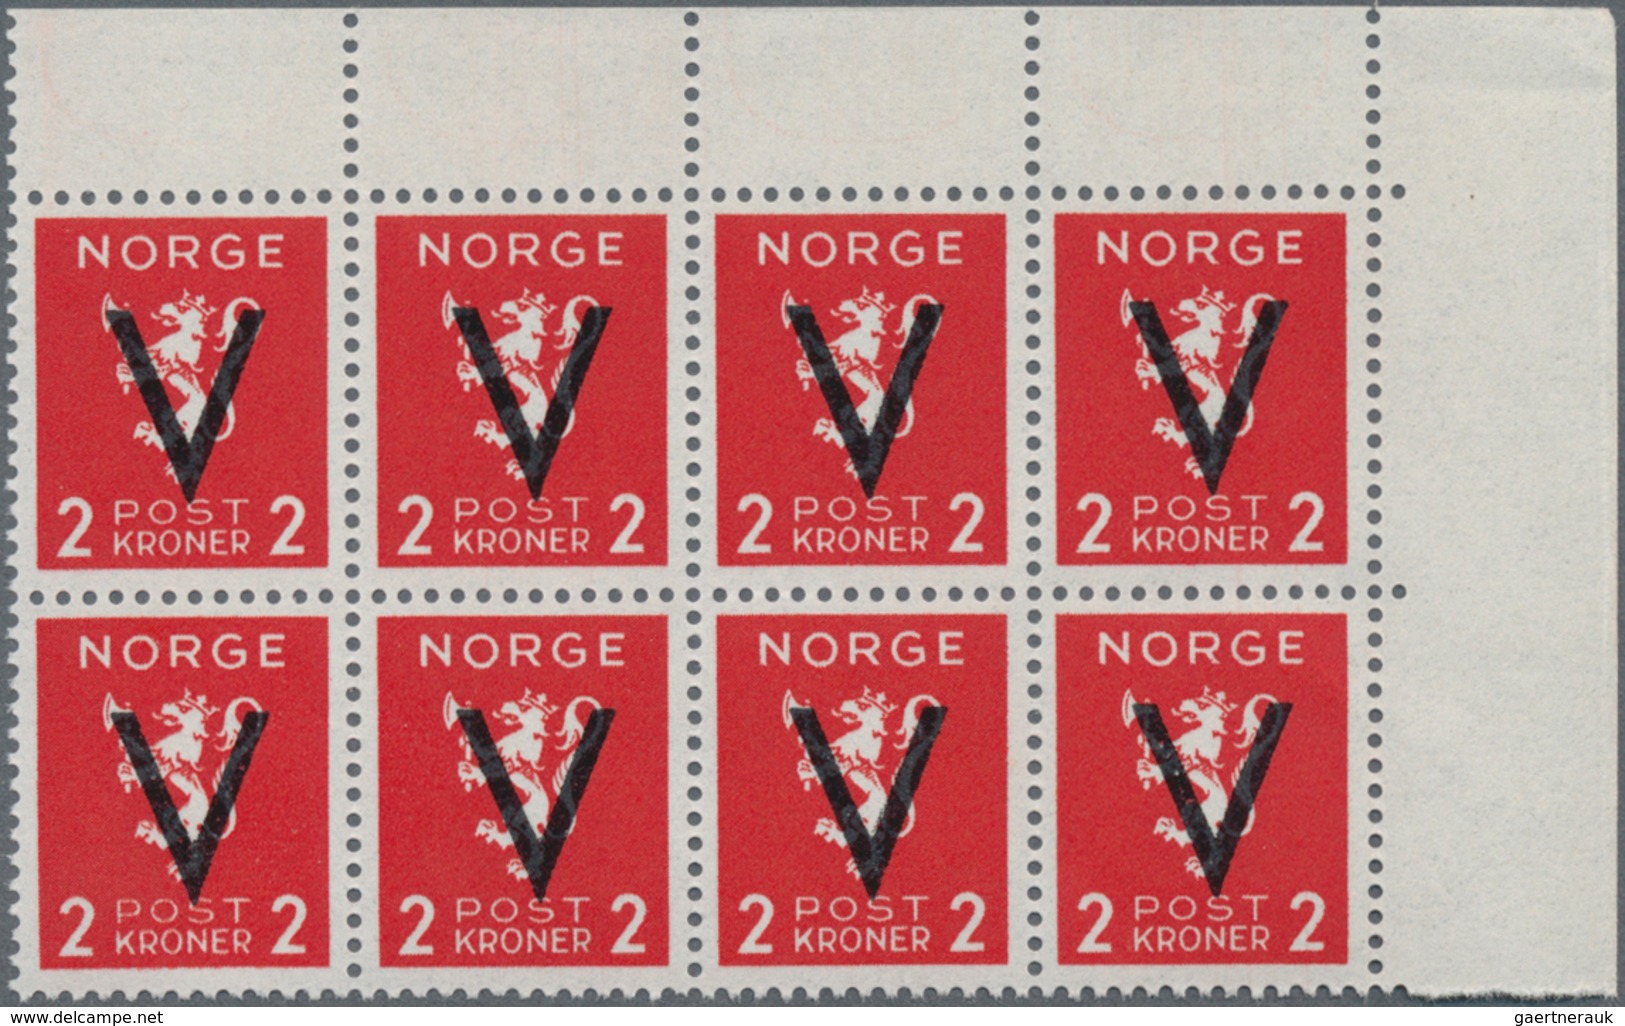 Skandinavien: 1856/1993 (ca.), duplicates on stockcards with some classic stamps but majority in the